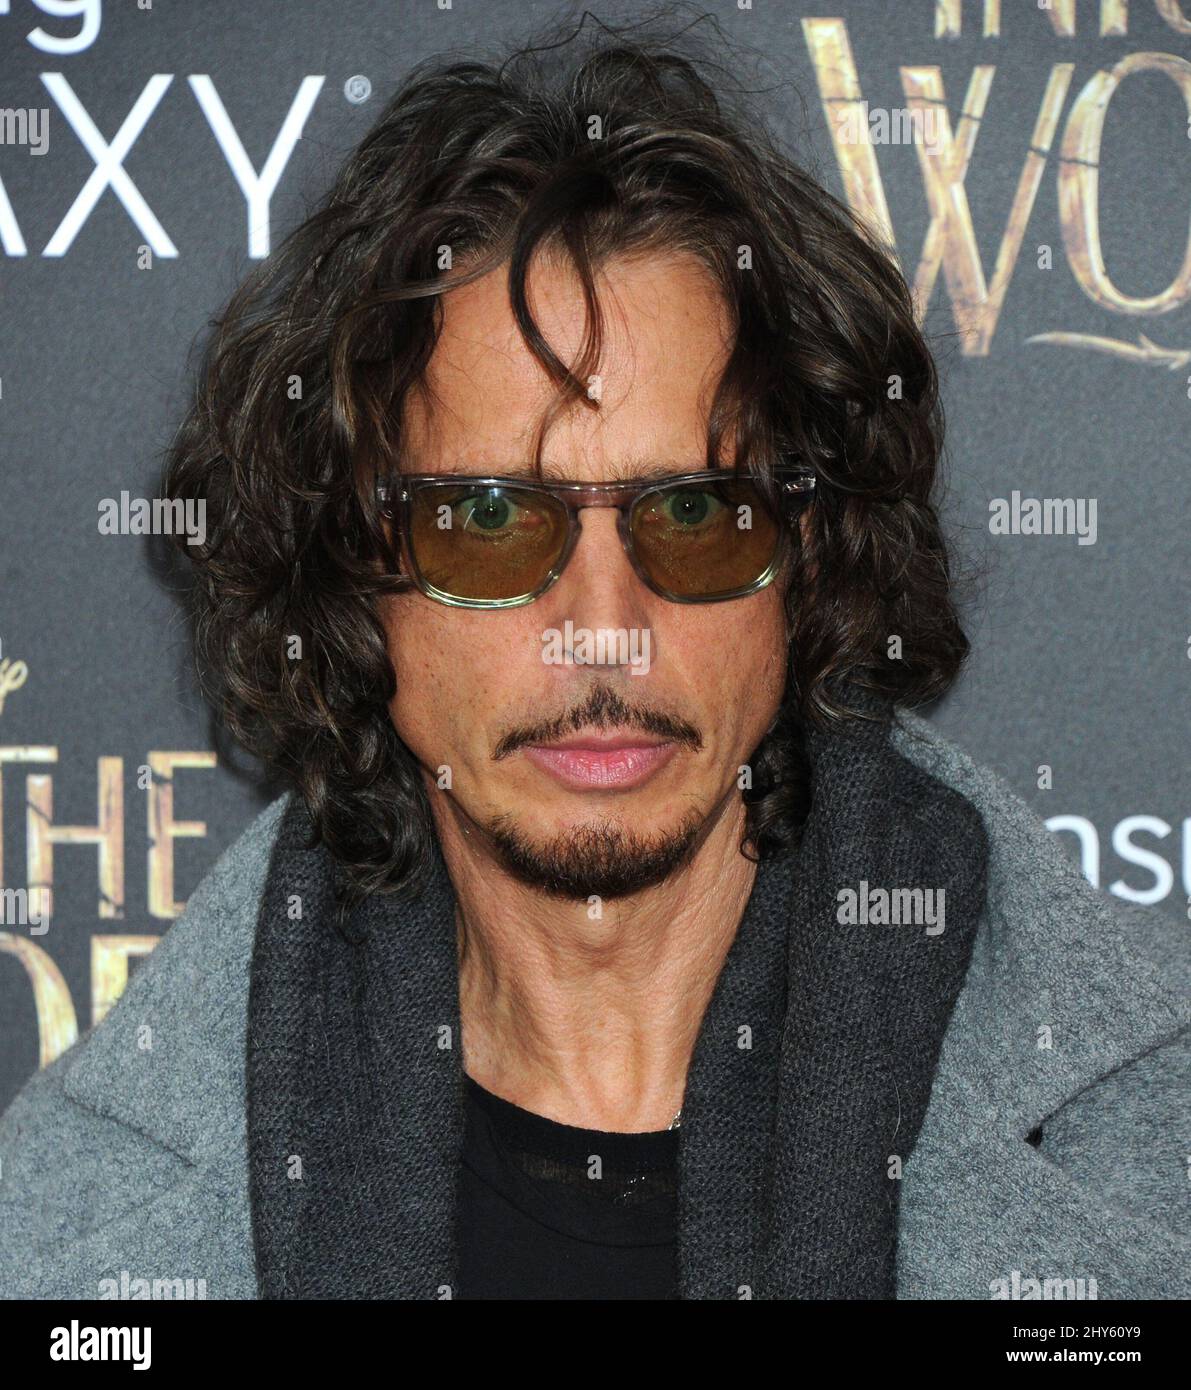 Chris Cornell attending the 'Into The Woods' World Premiere at the Ziegfeld Theatre in New York, USA. Stock Photo